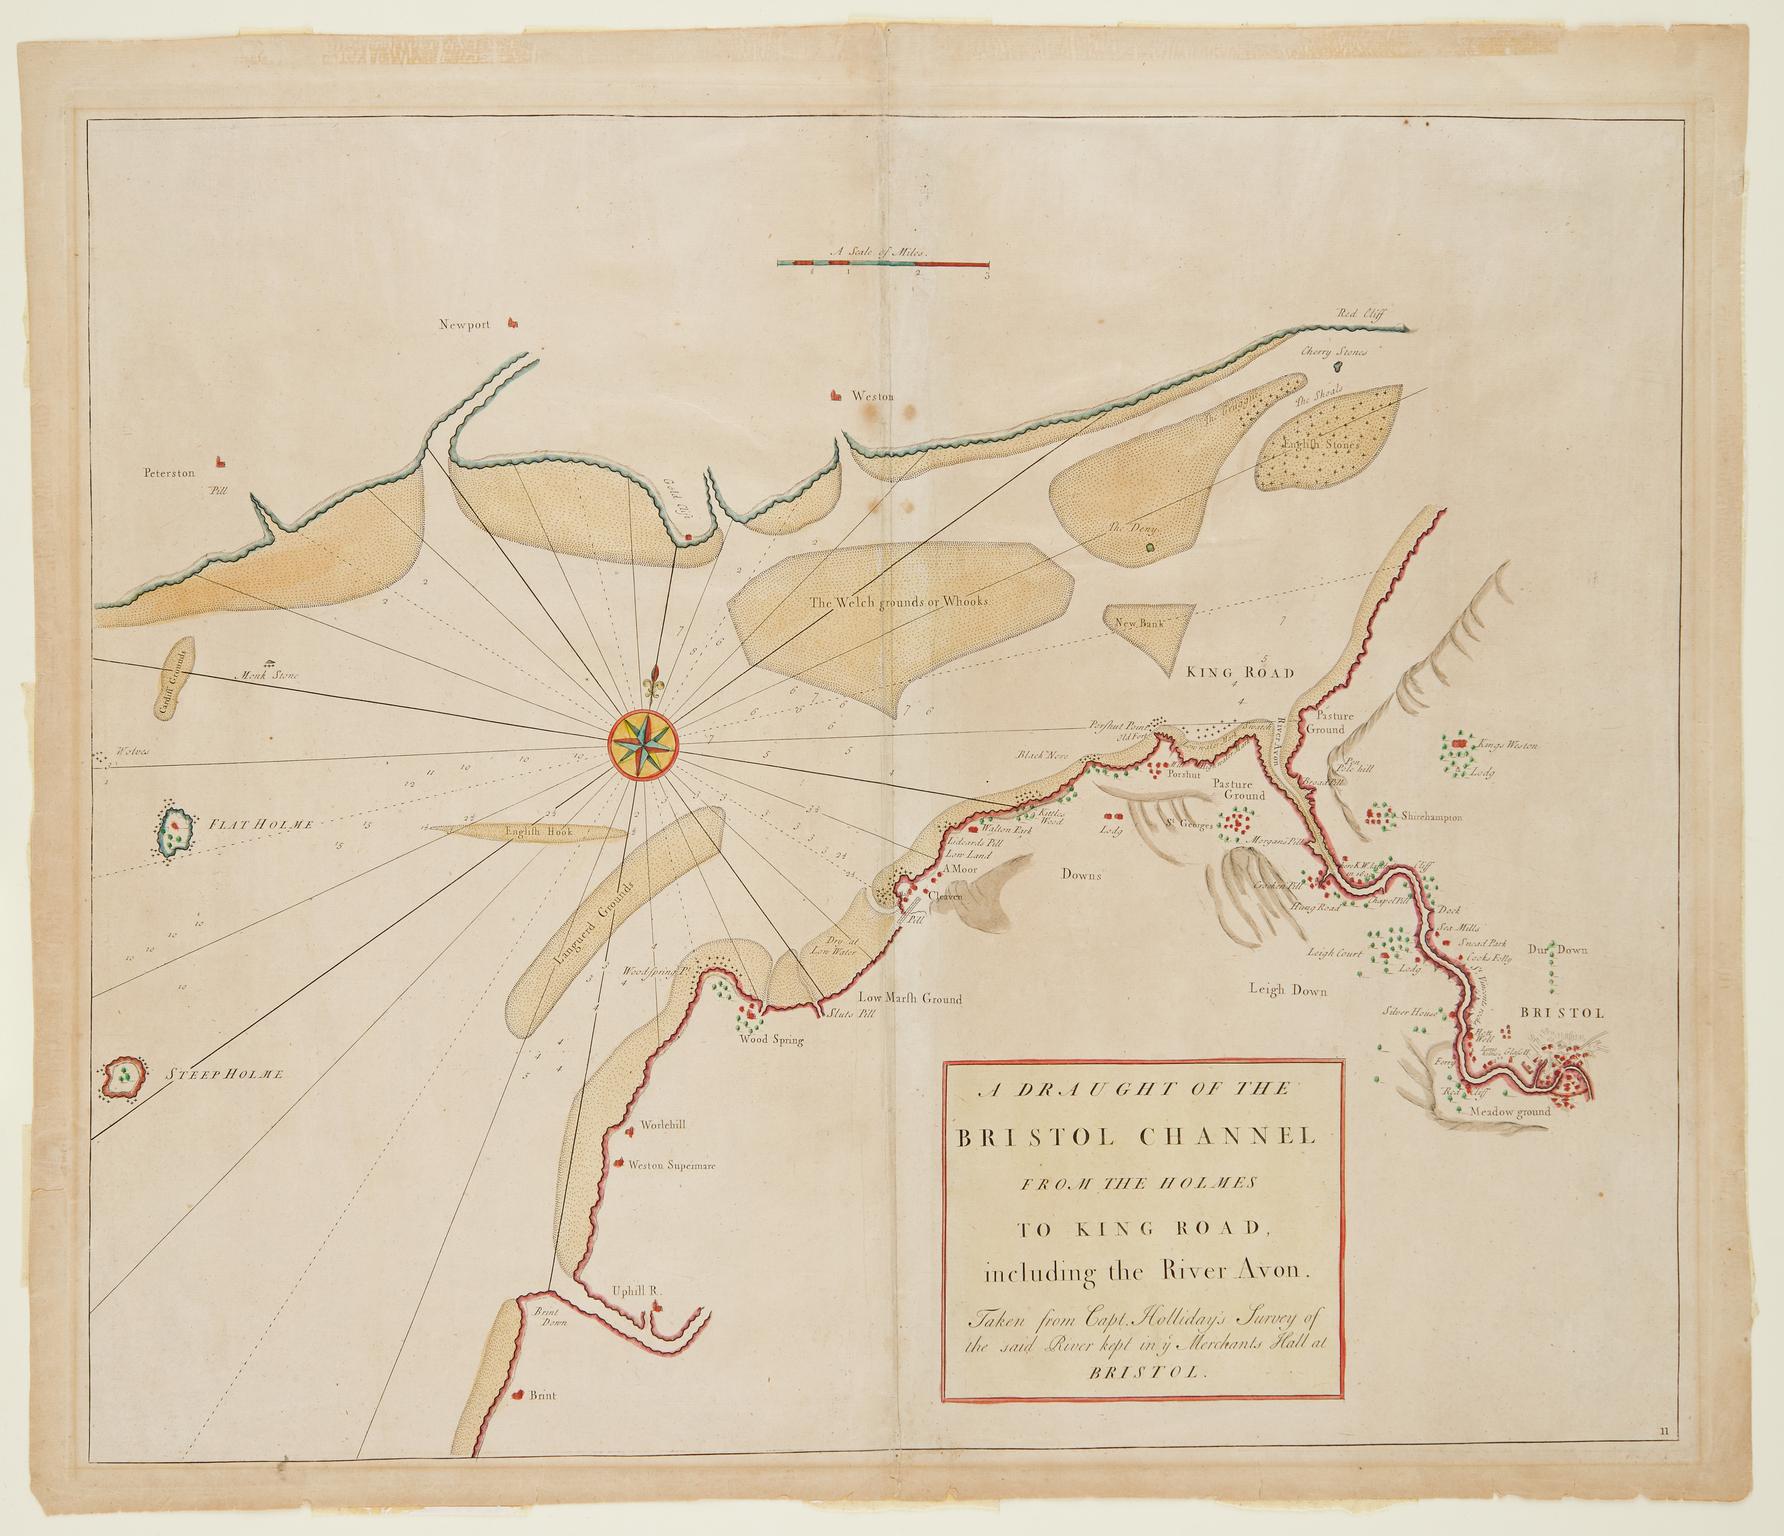 Navigation chart of the Bristol Channel, 1744